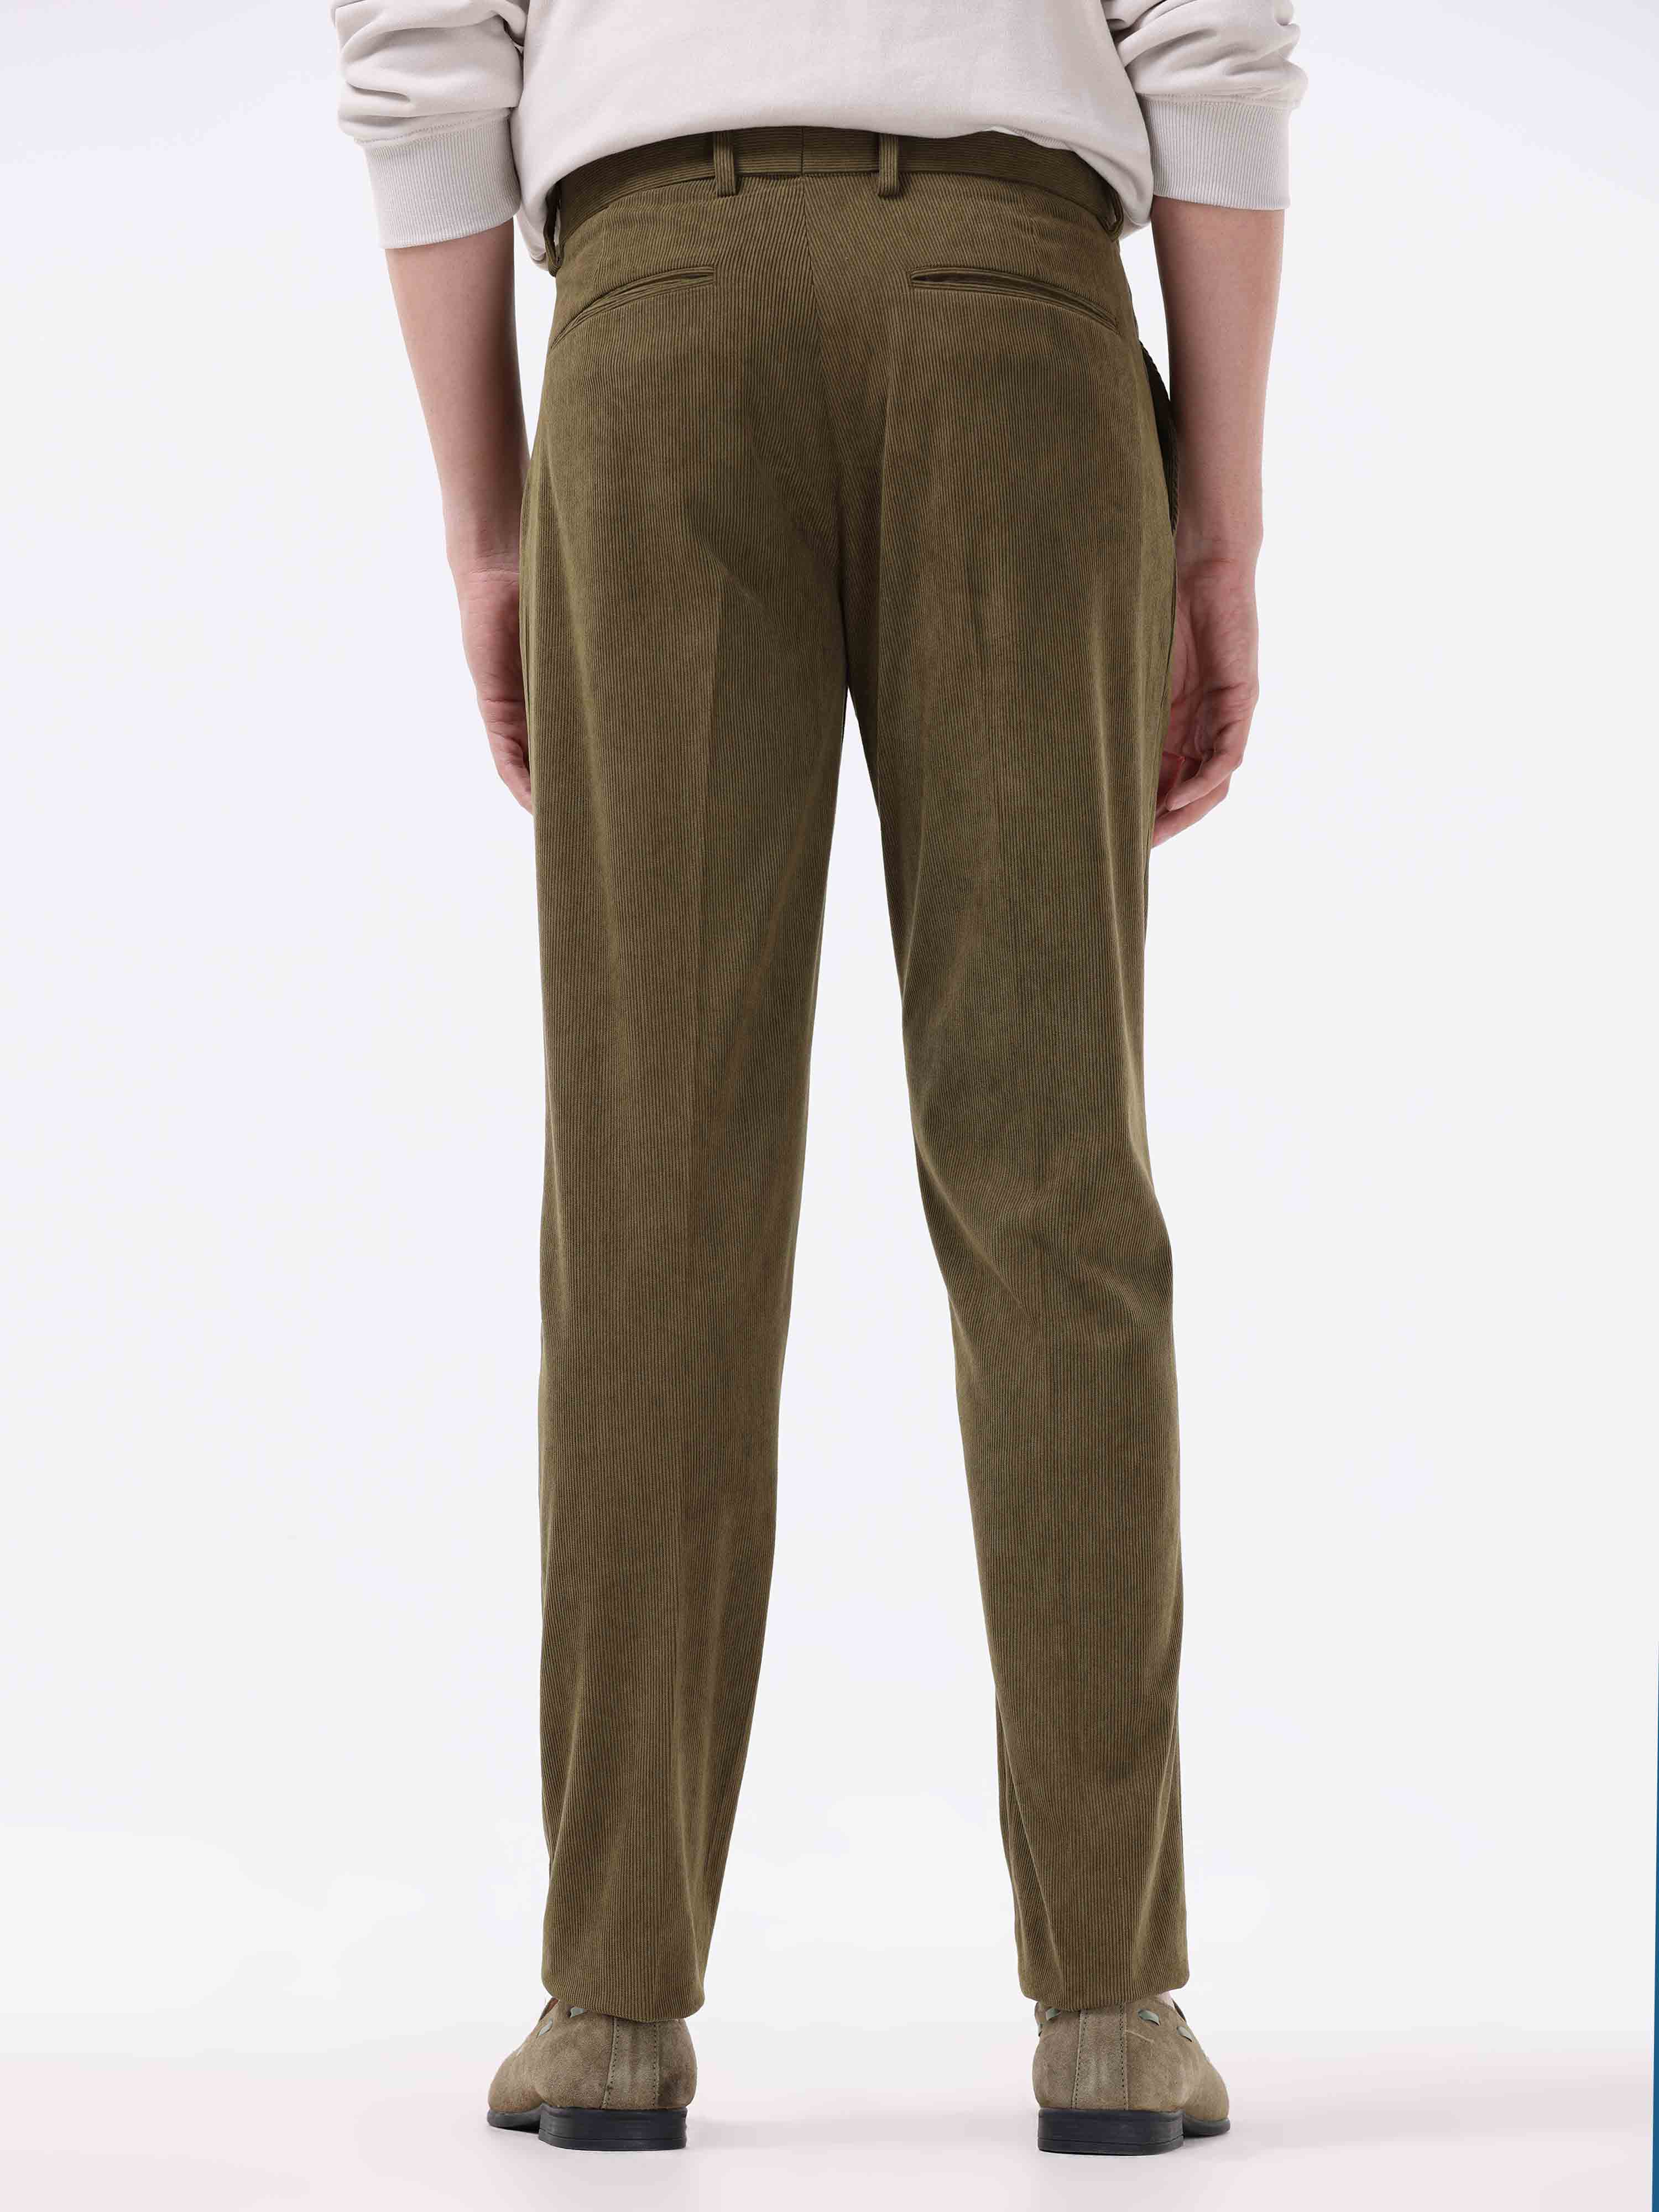 Buy PT Torino Corduroy Trousers online - 30 products | FASHIOLA.in